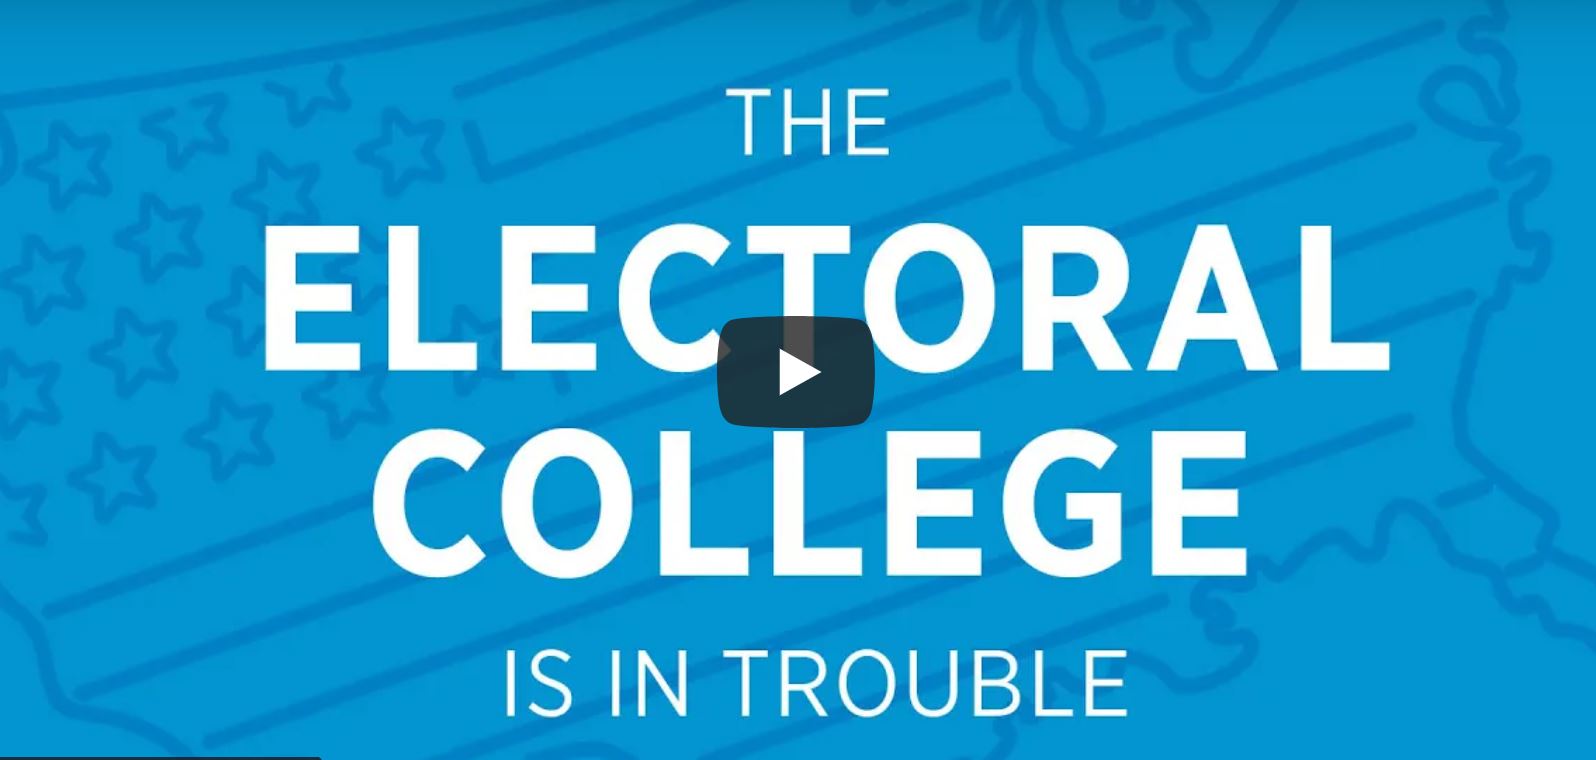 The Electoral College Is in Trouble